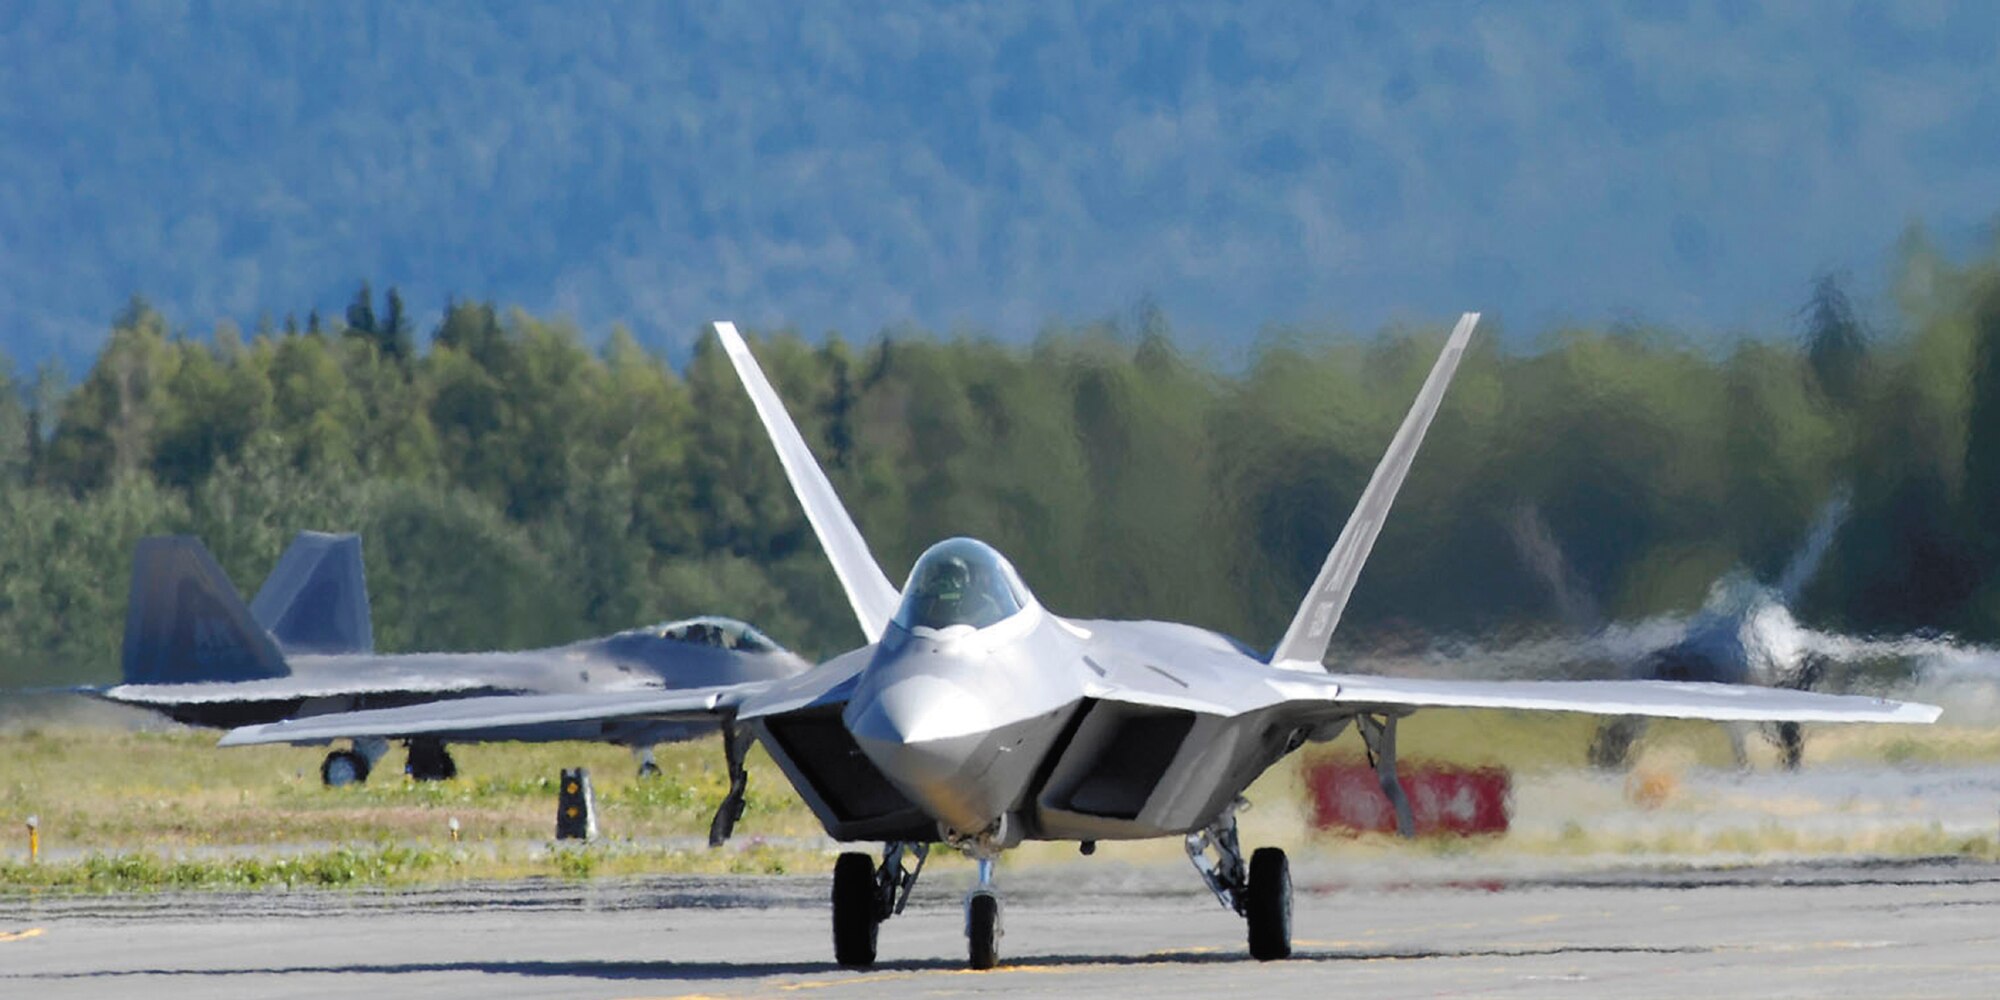 F-22 Raptors taxi following touchdown at Elmendorf Air Force Base, Alaska, during a ceremony marking the aircraft's arrival Aug. 8. Under an associate unit relationship, the regular Air Force's 3rd Wing and Air Force Reserve Command's 477th Fighter Group will fly and maintain the aircraft. The 477th FG is AFRC's first F-22 unit. (Tech. Sgt. Keith Brown)